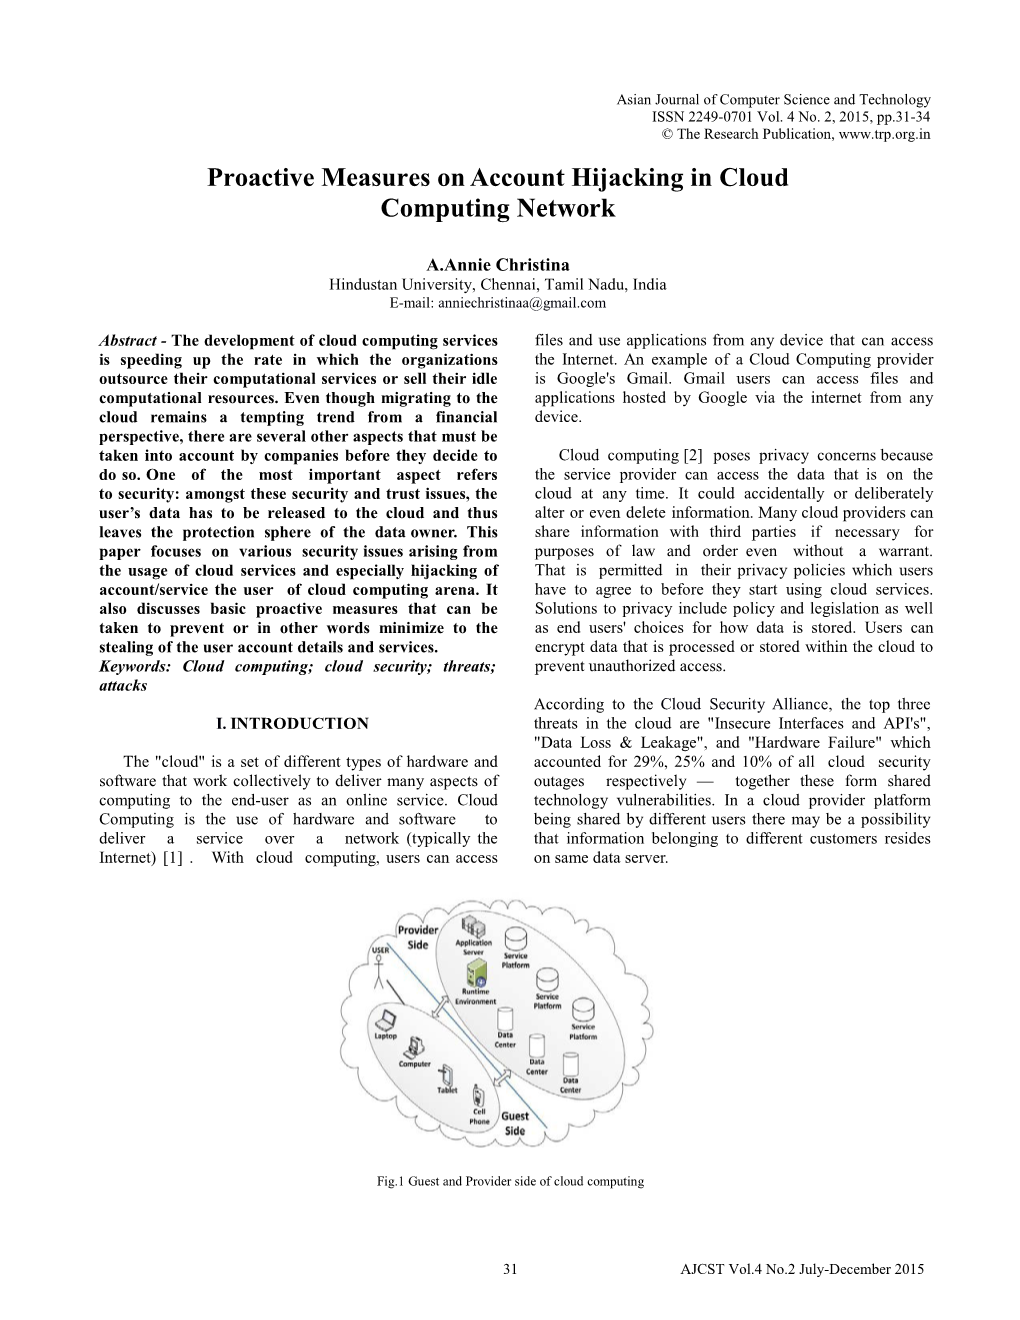 Proactive Measures on Account Hijacking in Cloud Computing Network